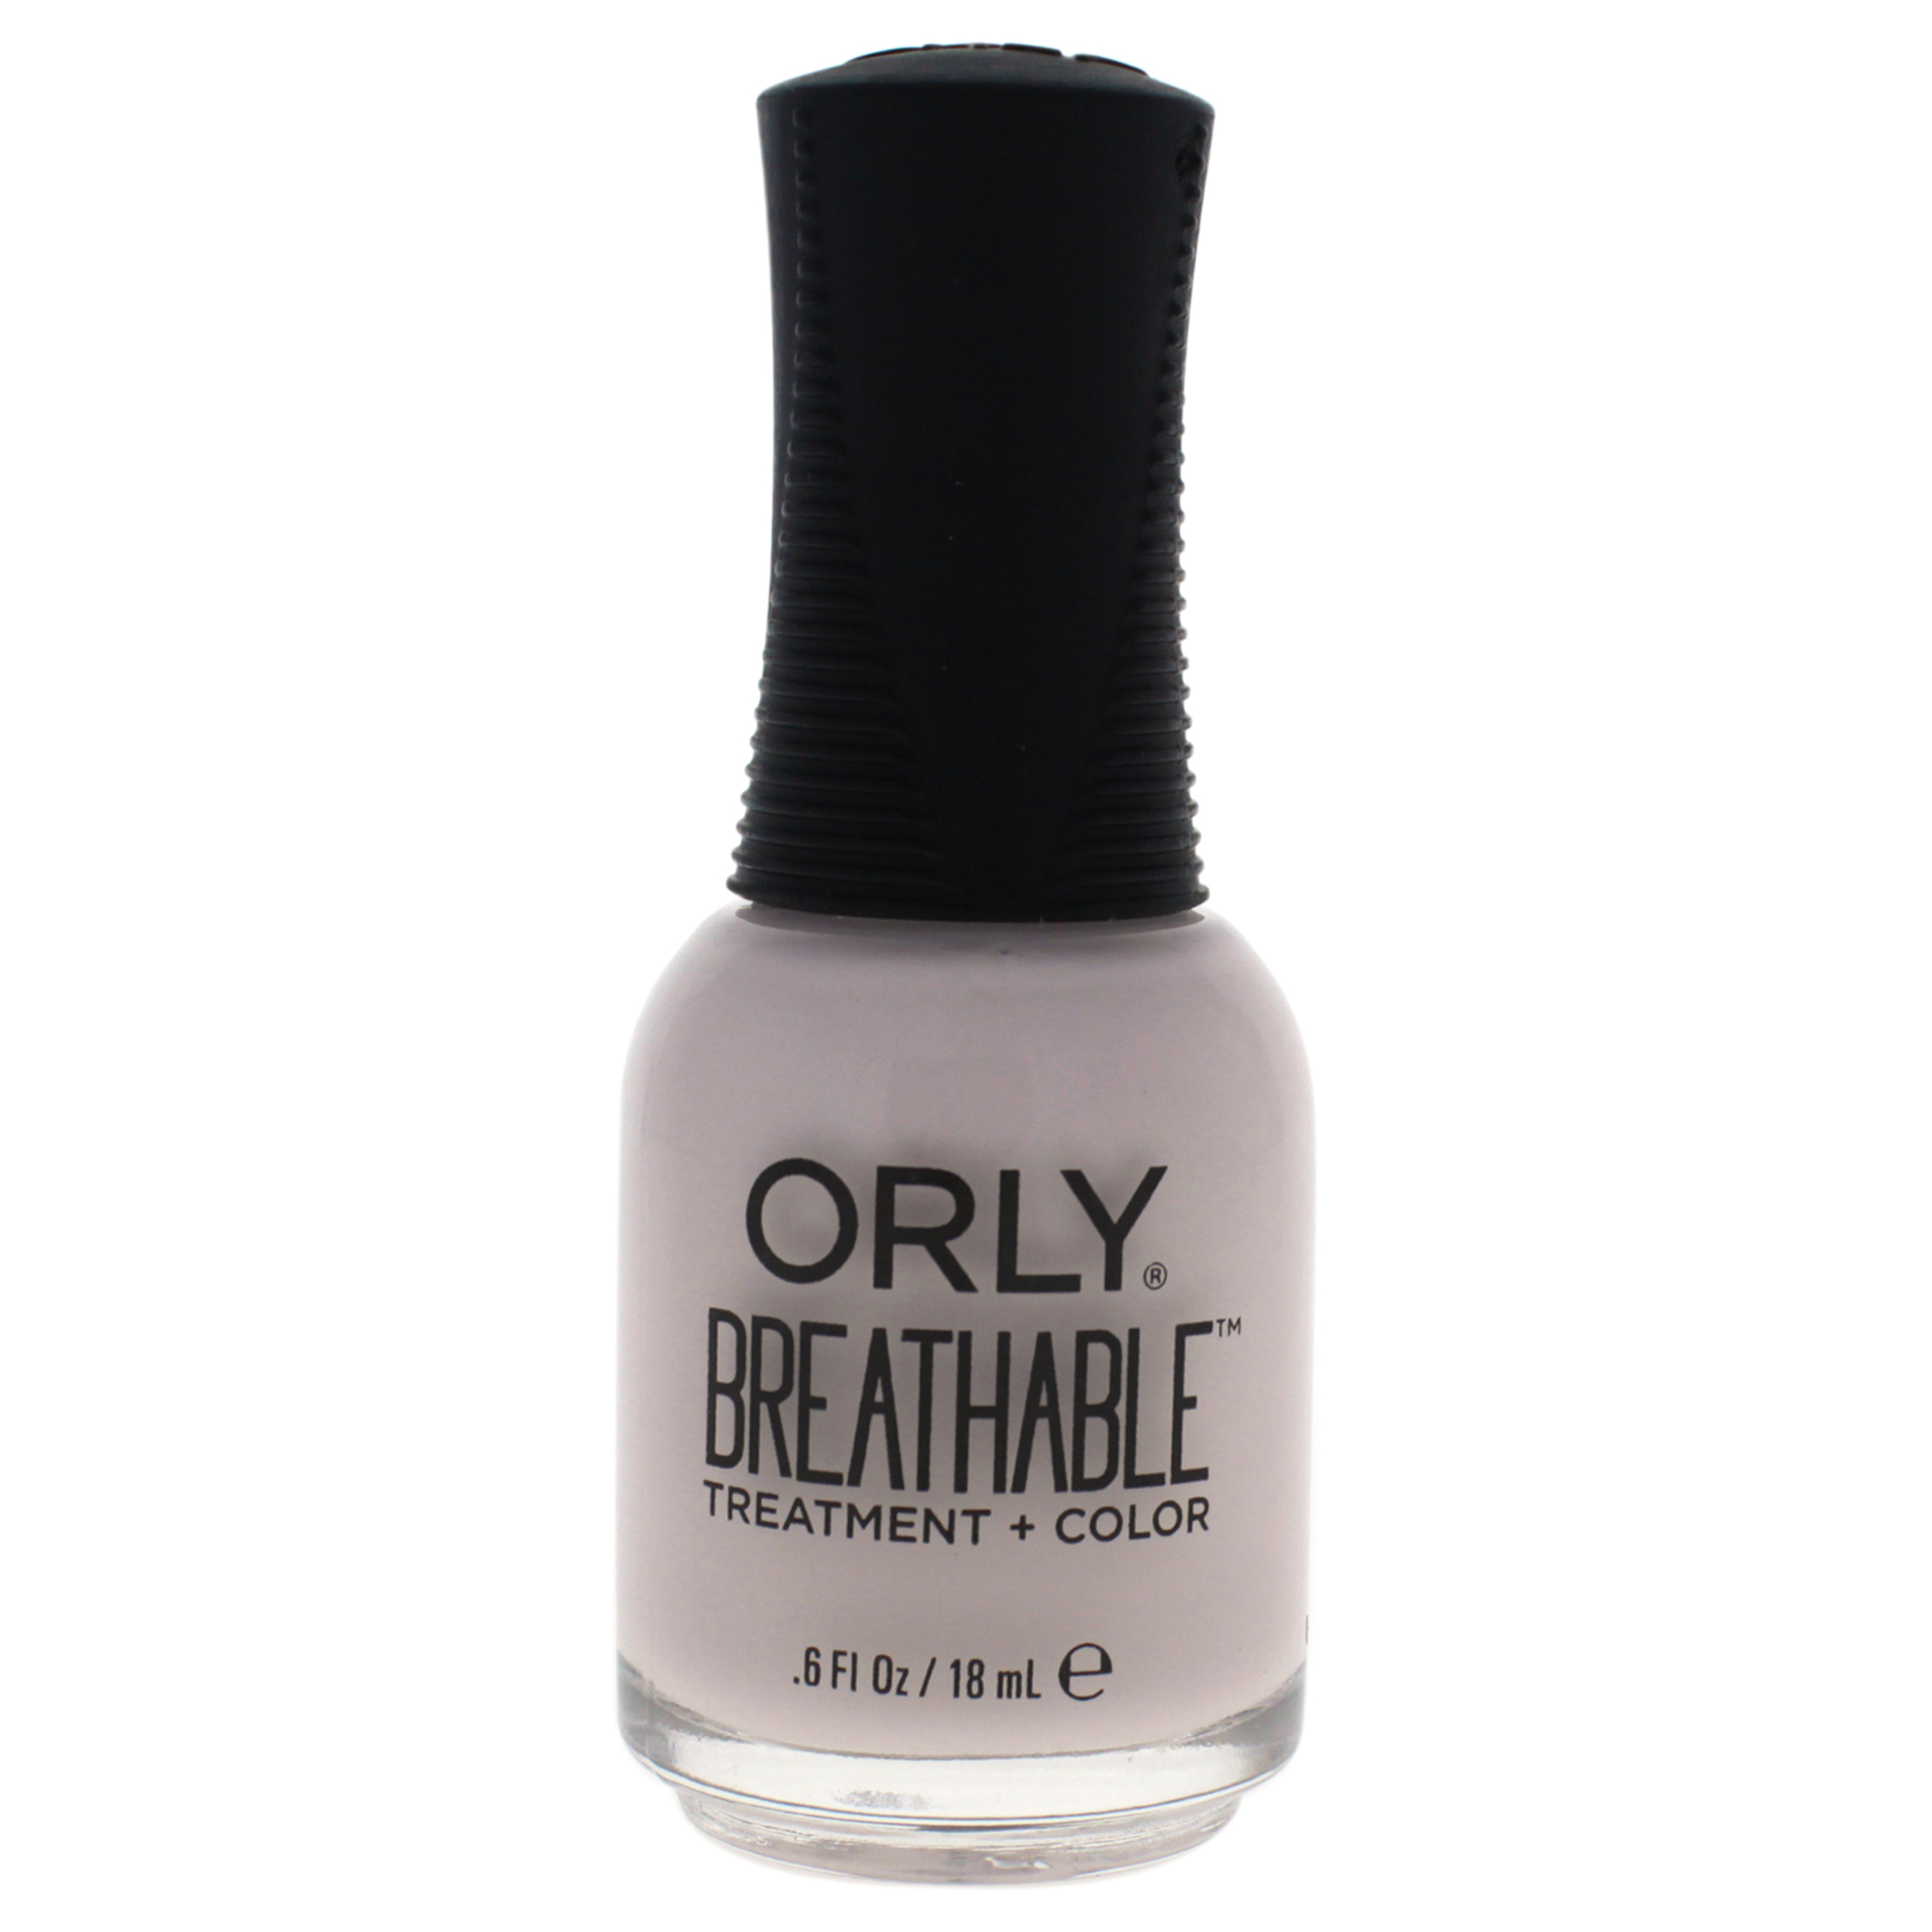 ORLY Breathable Treatment + Color # 20909 - Light As A Feather by Orly for Women - 0.6 oz Nail Polish